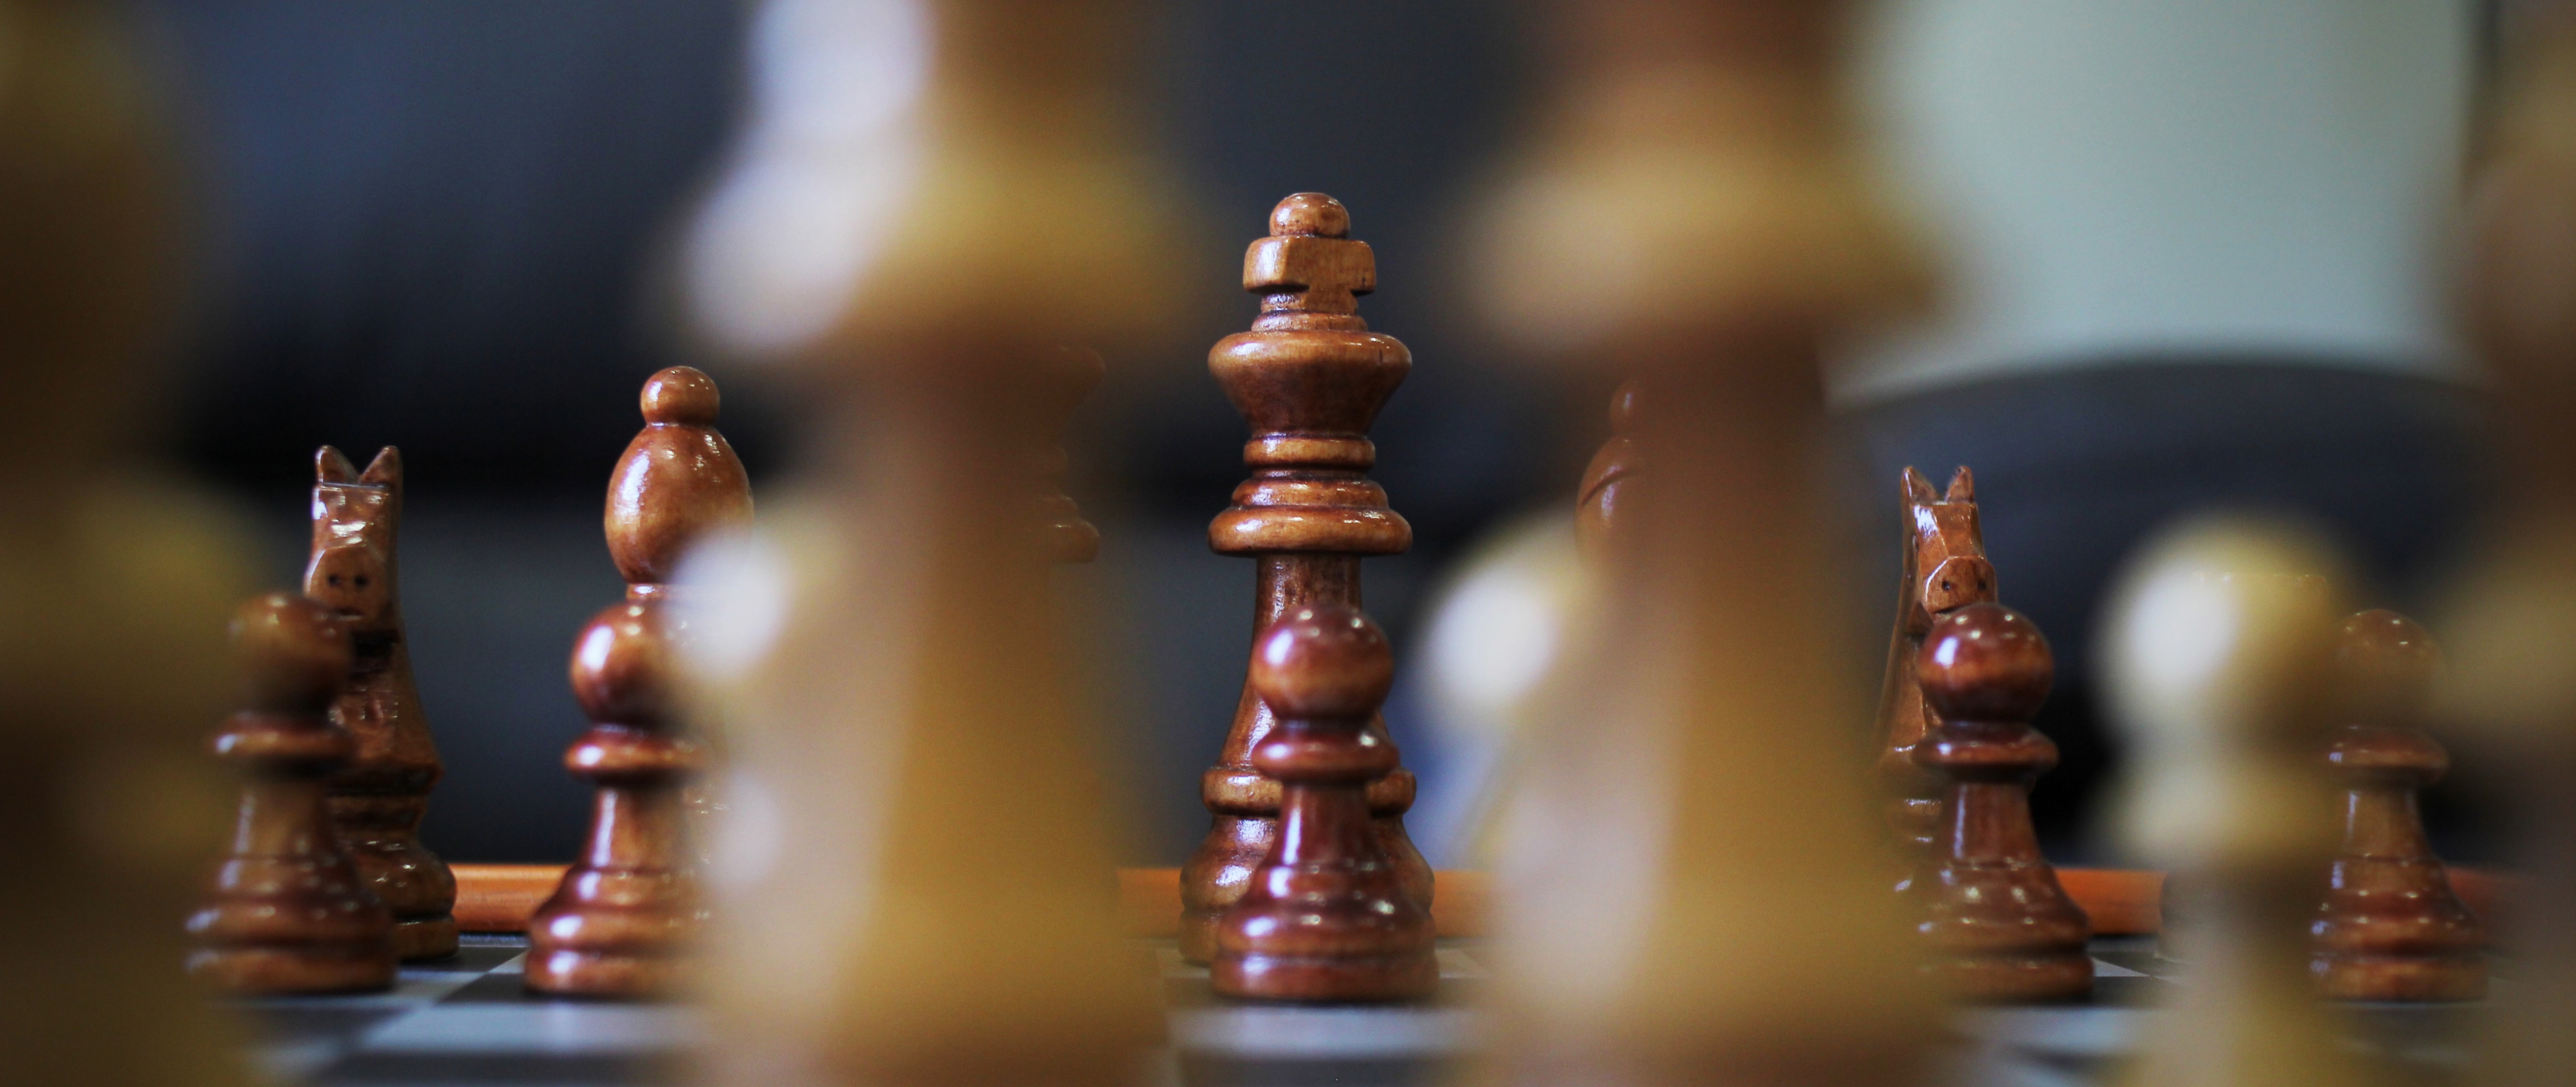 Chess Pieces Hd Wallpaper for Desktop and Mobiles 4K Ultra HD Wide TV ...